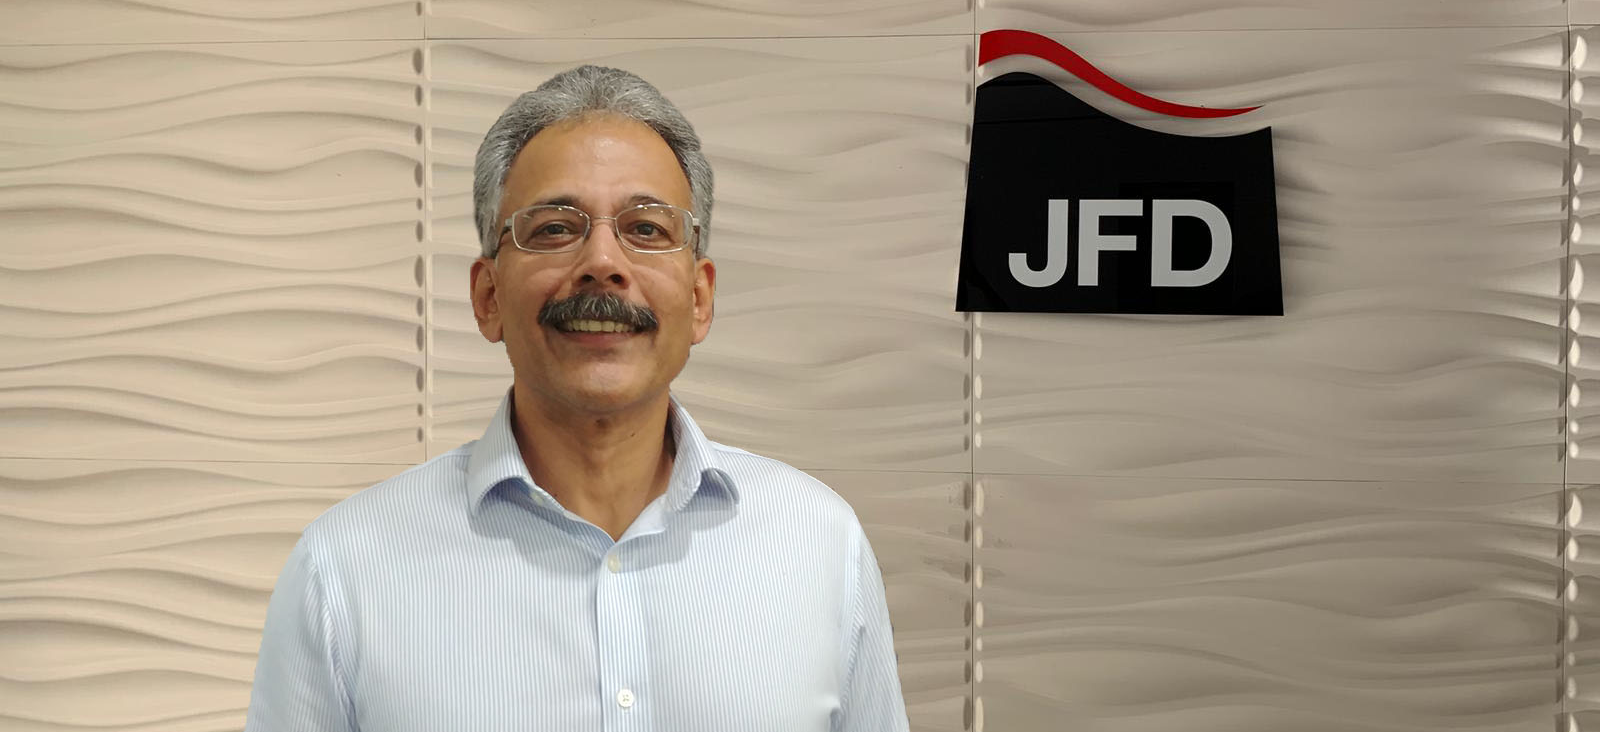 MEMBER NEWS: JFD appoints Managing Director for Asia to strengthen local services